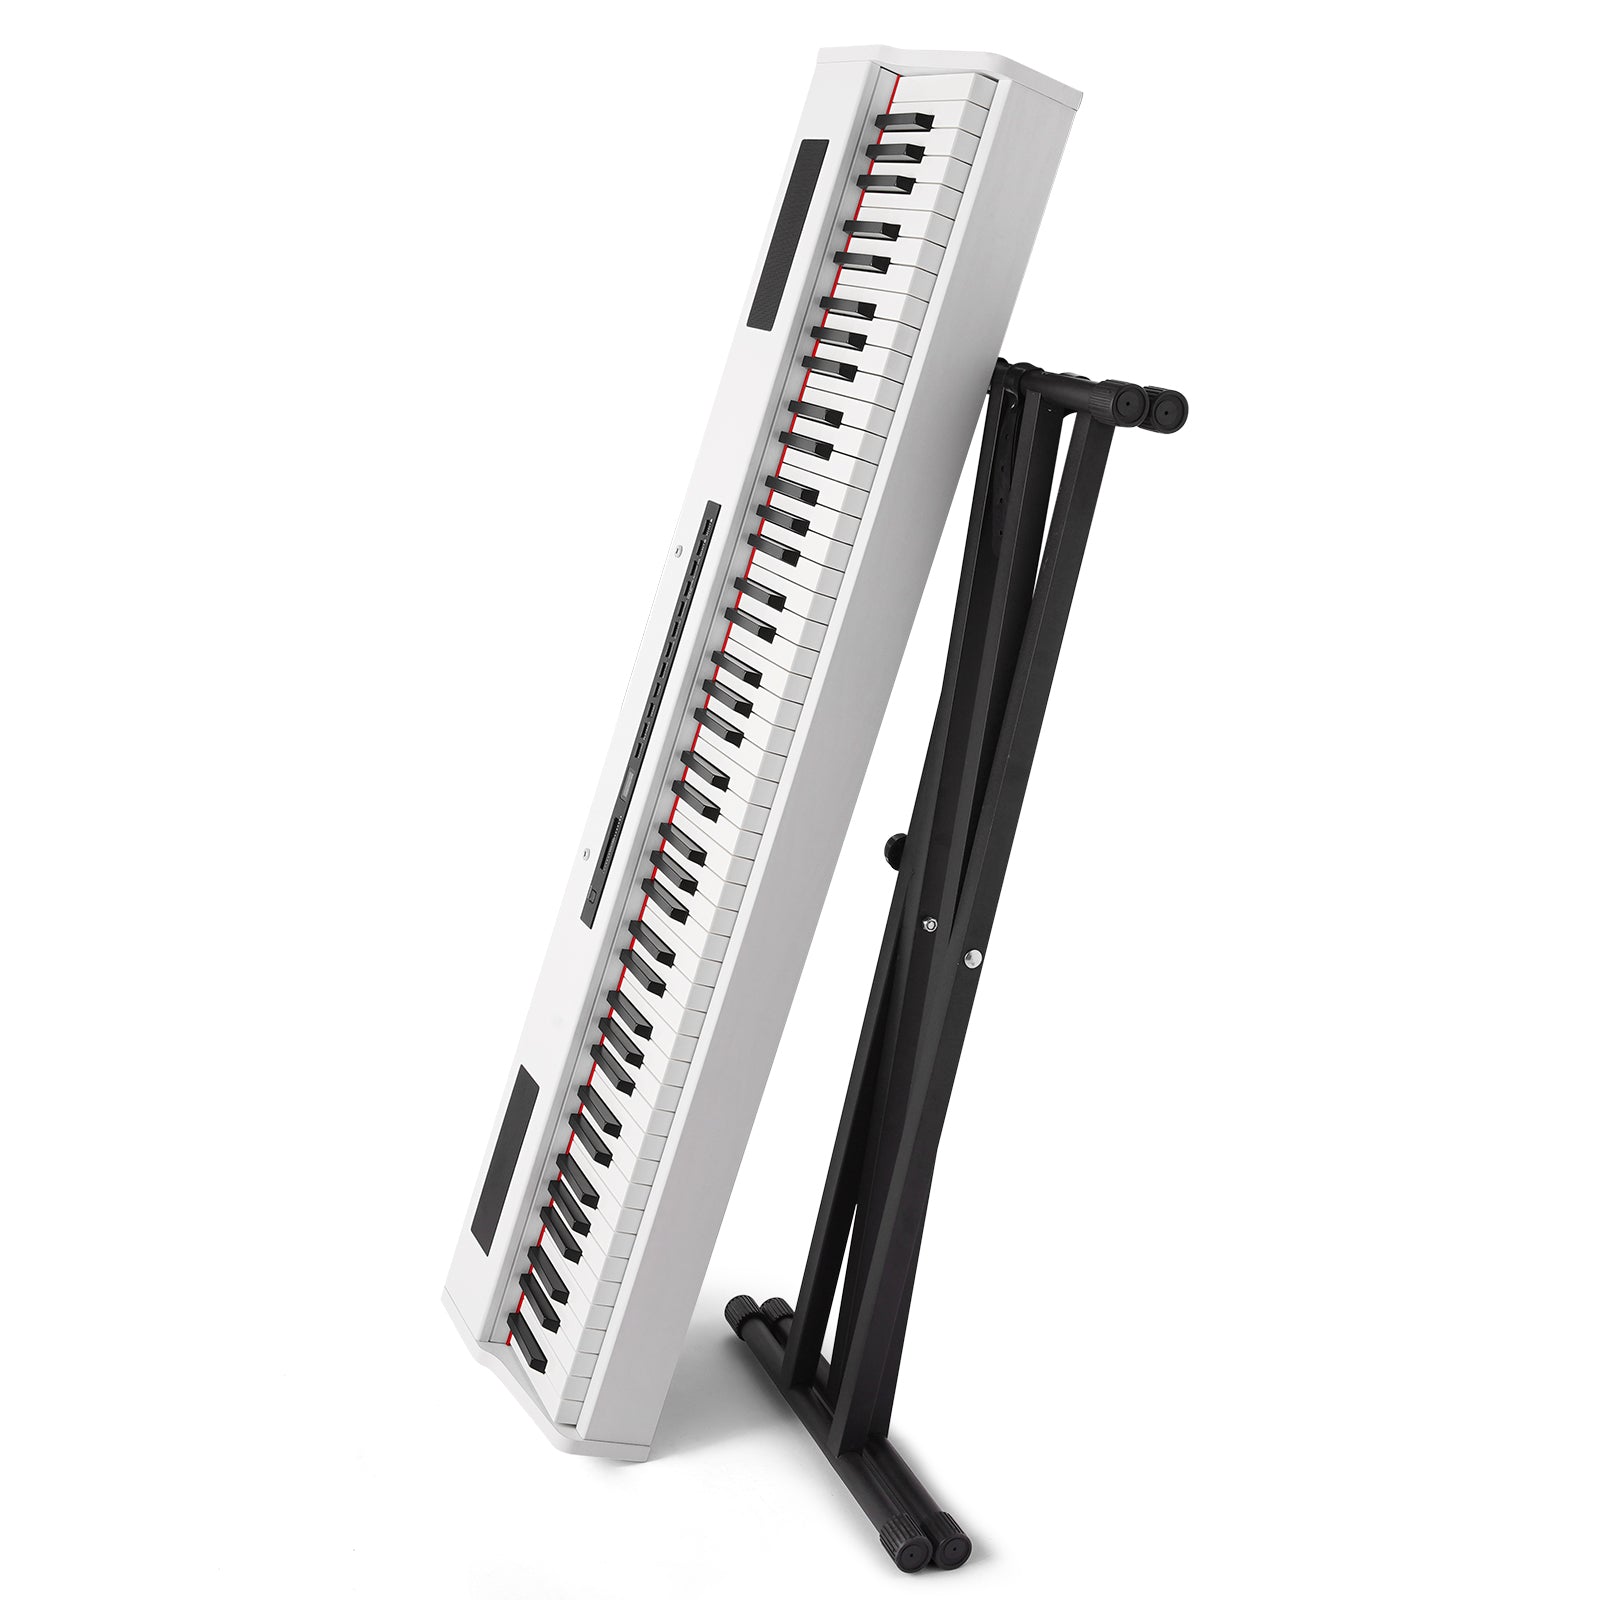 The 10 best 88-key weighted keyboards and digital pianos